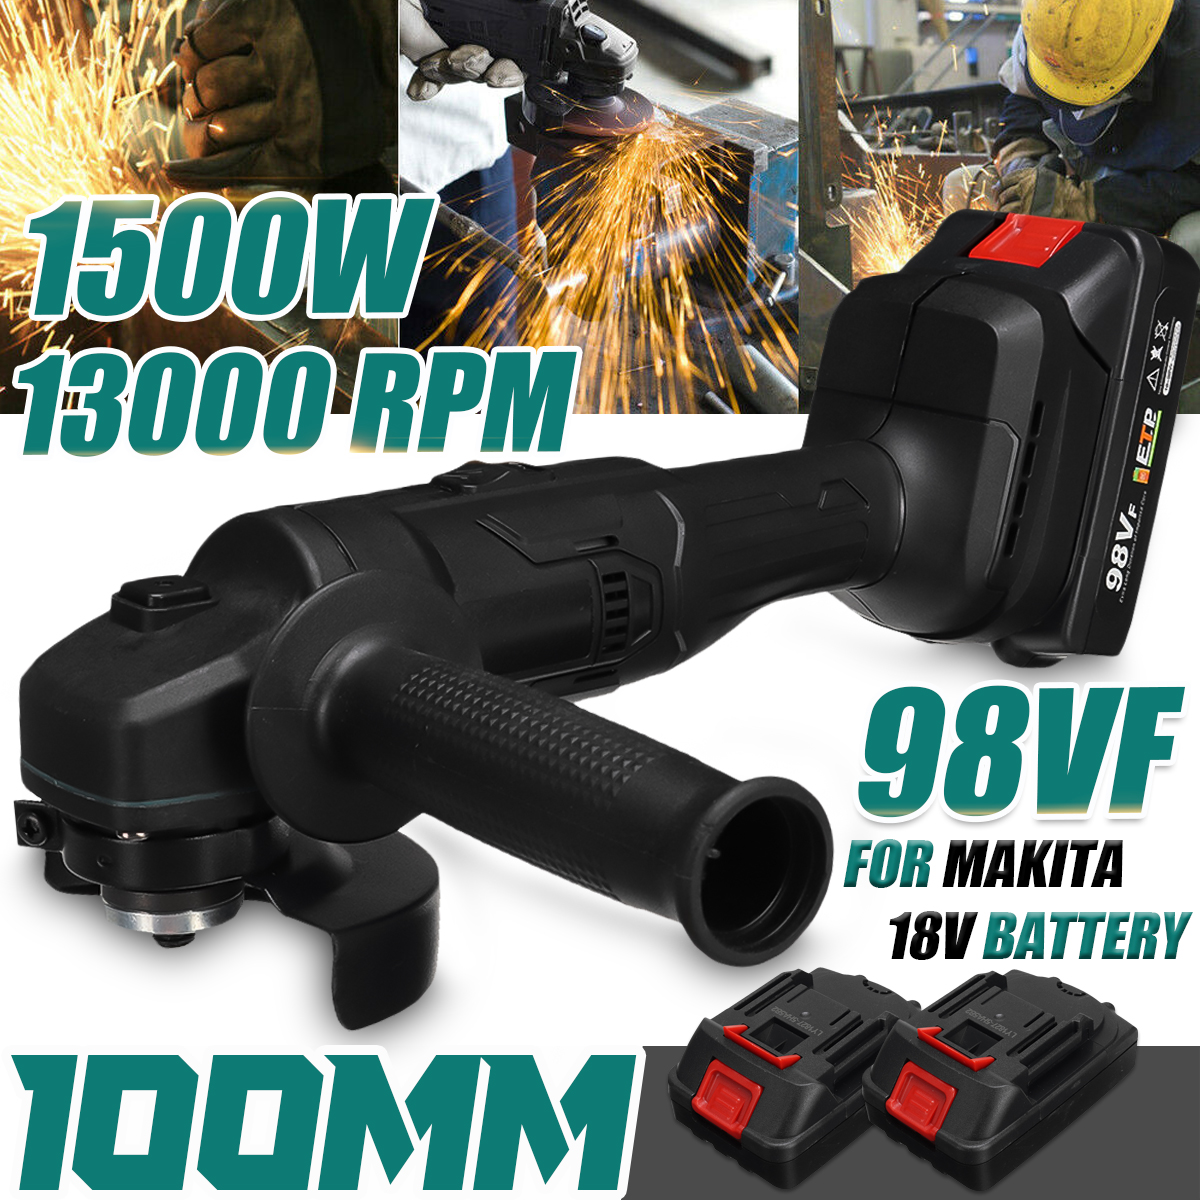 Electric-Cordless-Angle-Grinder-100mm-Electric-Polisher-For-Makita-18V-Battery-1903419-1